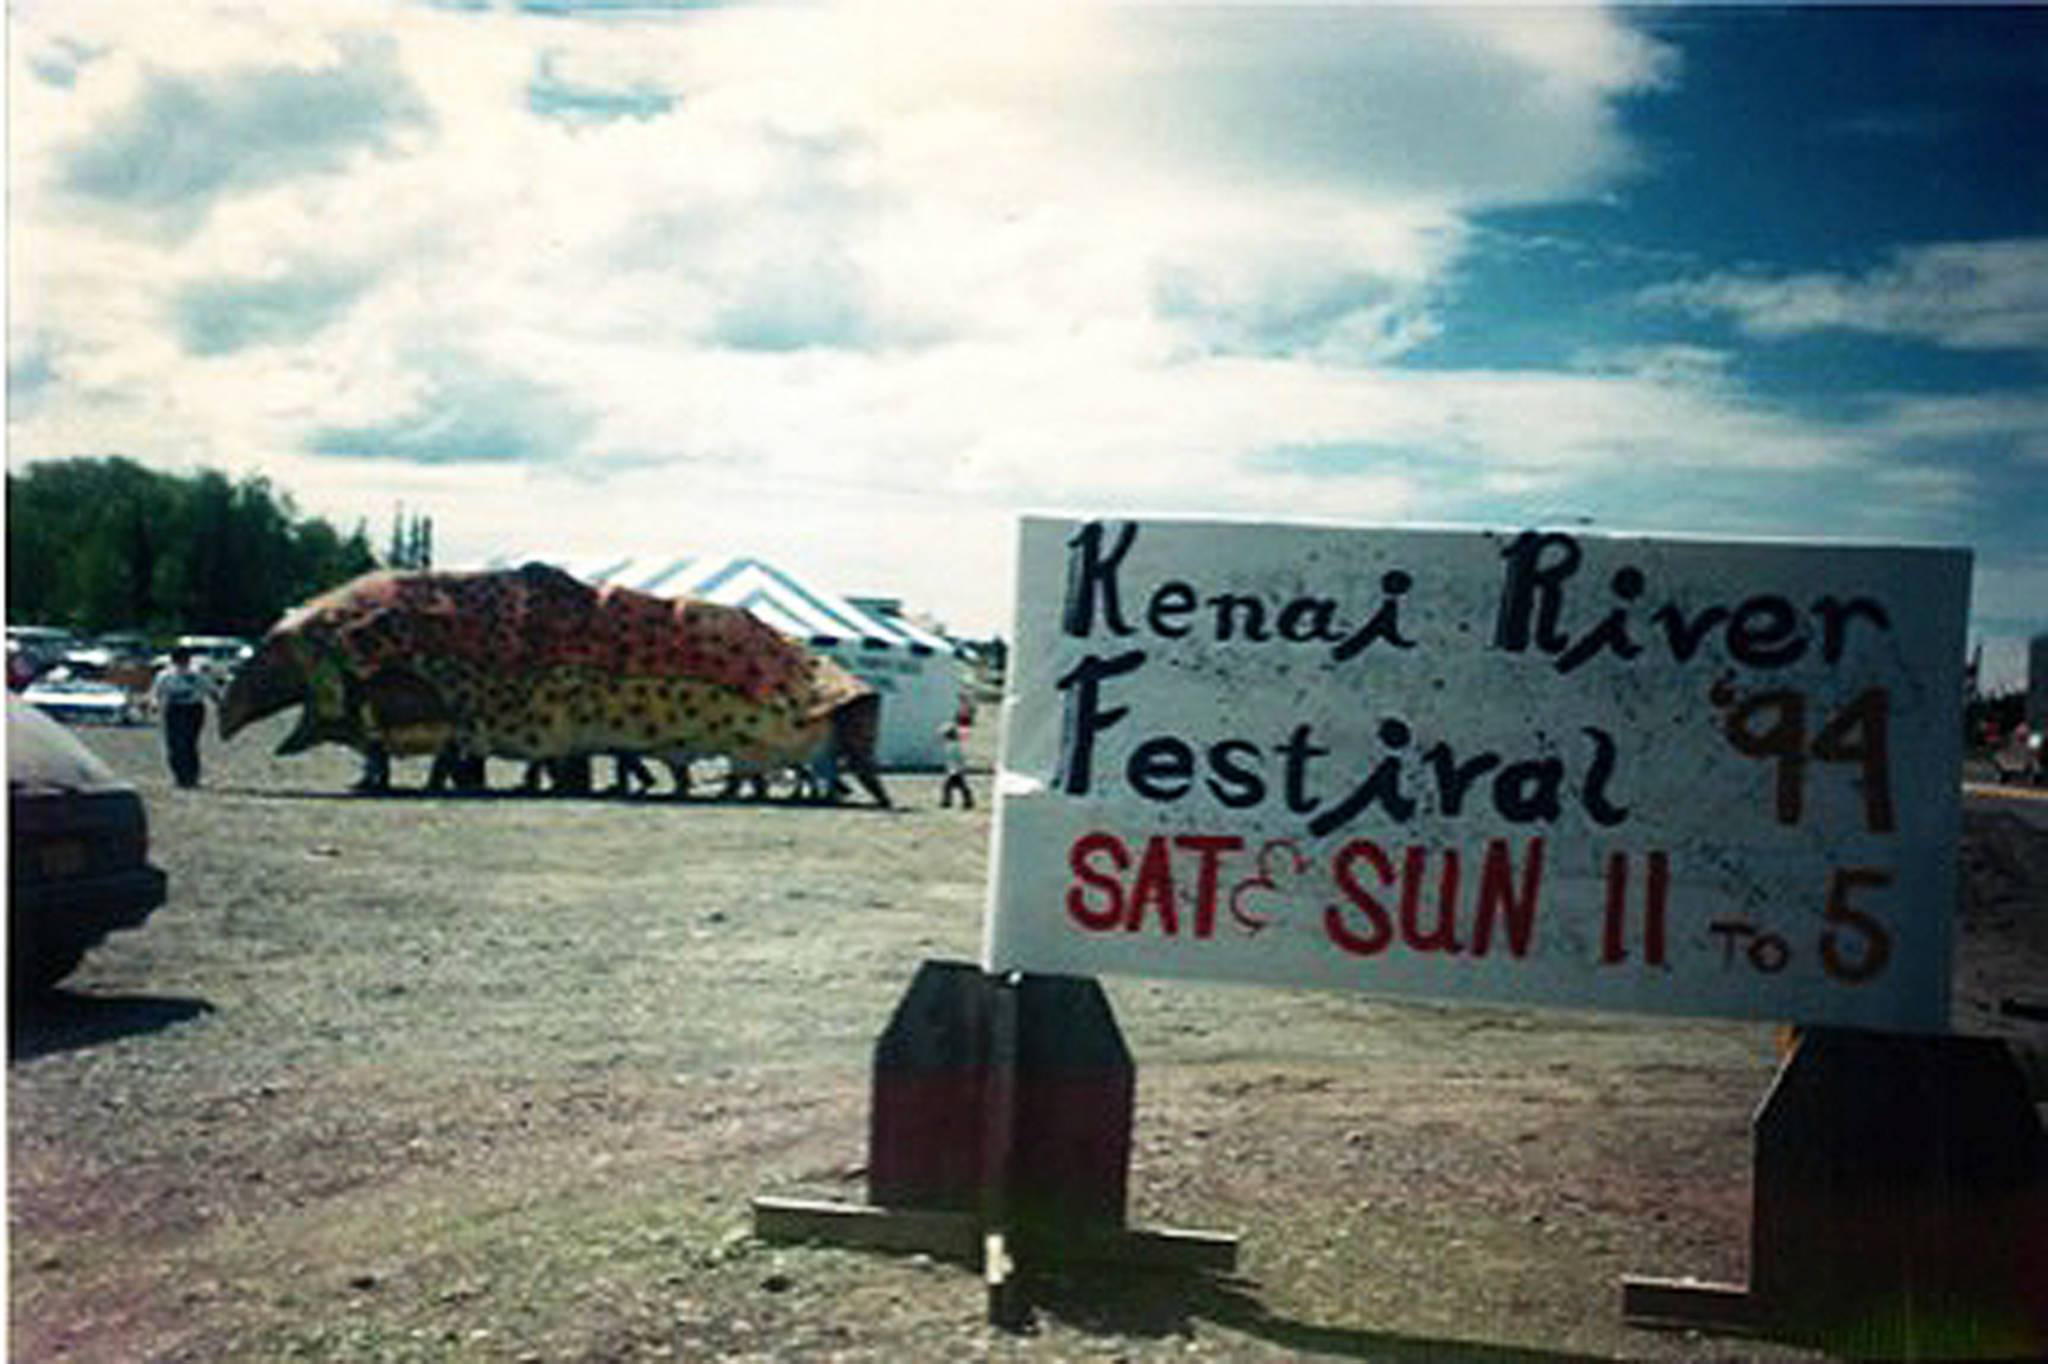 A sign welcomes visitors to the 1994 Kenai River Festival in Soldotna. (Photo provided by the Kenai Watershed Forum)